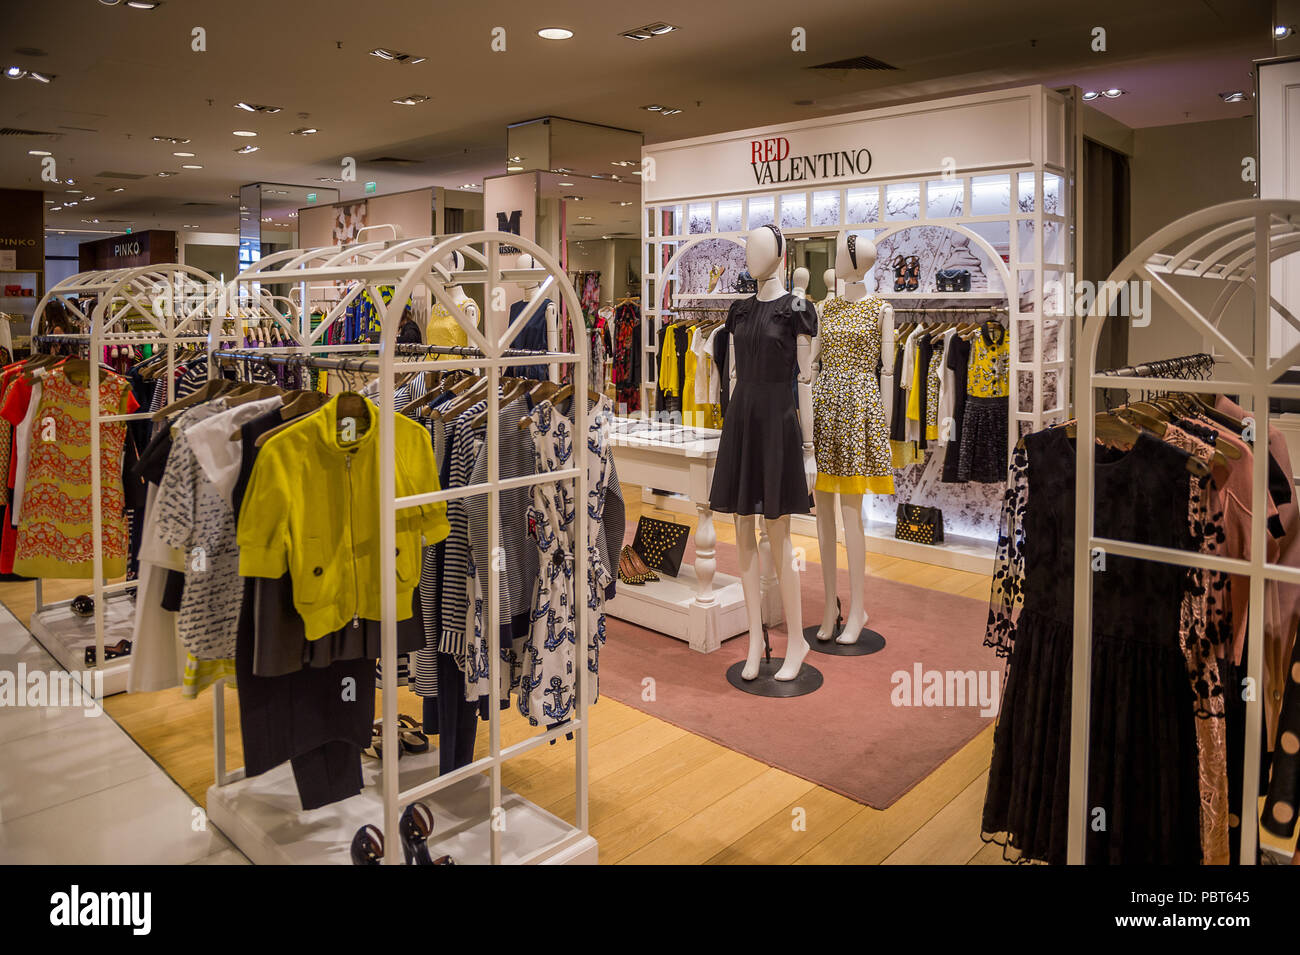 PARIS, FRANCE - JUN 6, 2015: Red Valentino in the Galeries Lafayette city  mall. It was open in 1912 Stock Photo - Alamy